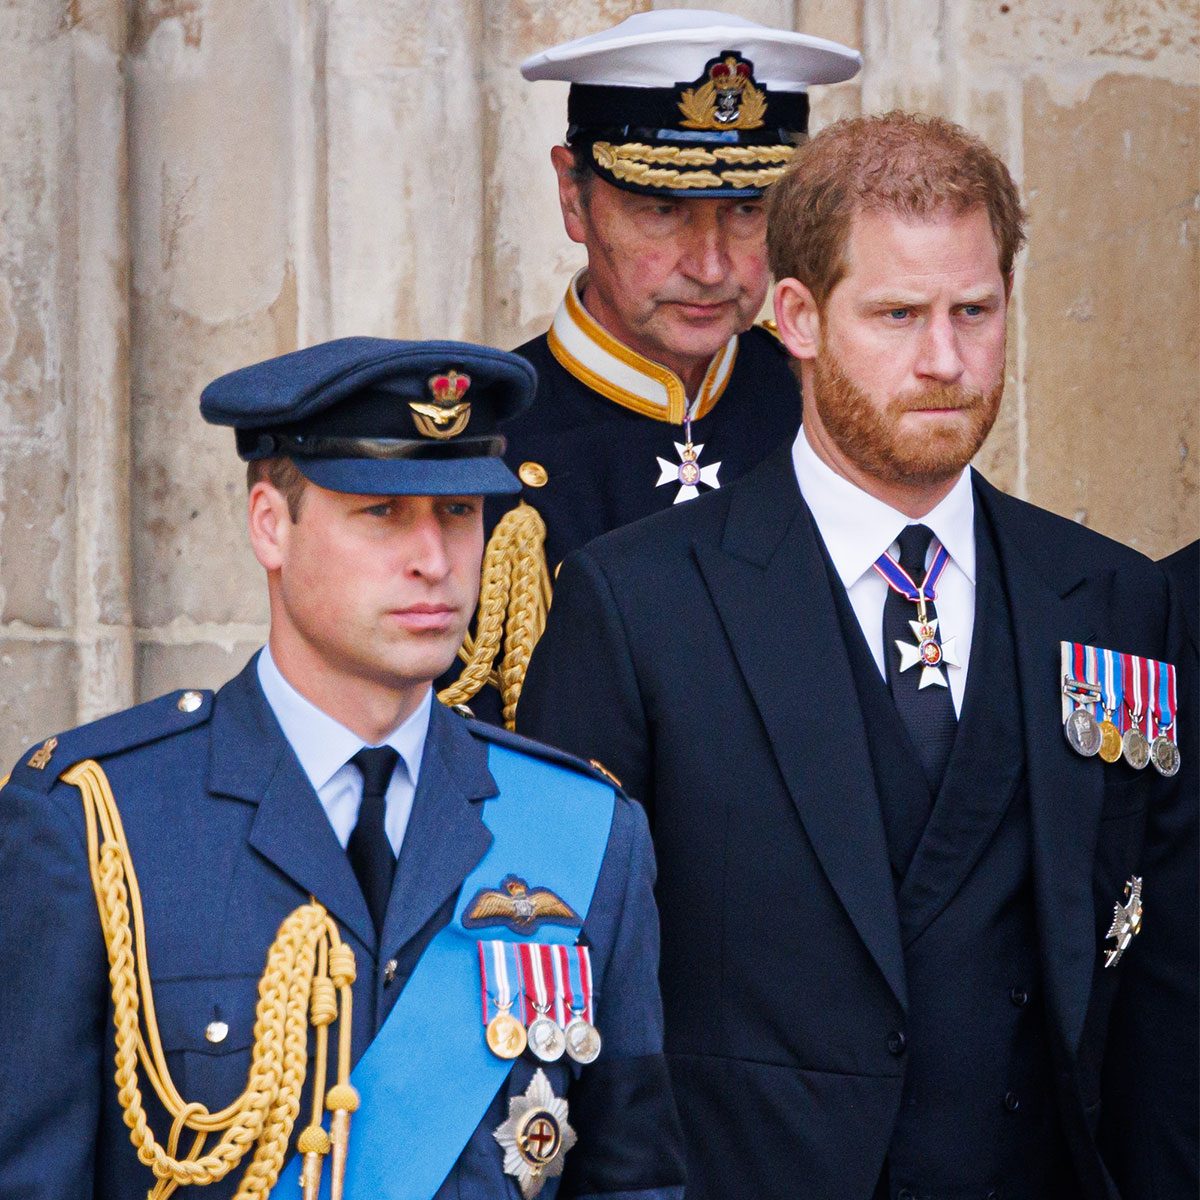 prince william military uniform prince harry black suit queen elizabeth ii funeral westminster abbey